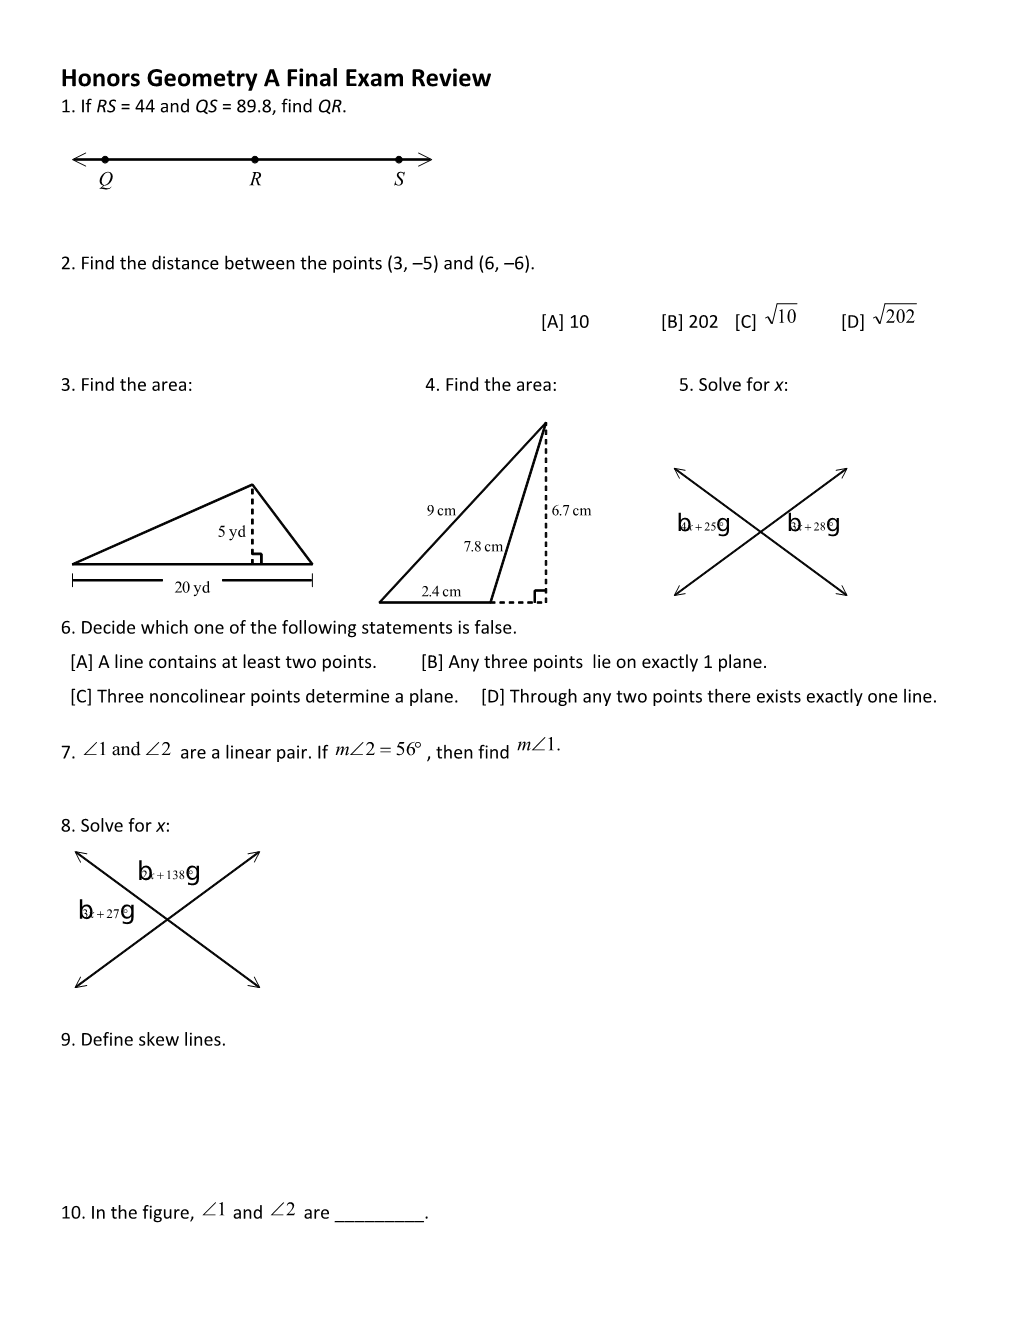 Honors Geometry a Final Exam Review Tri 1 2004